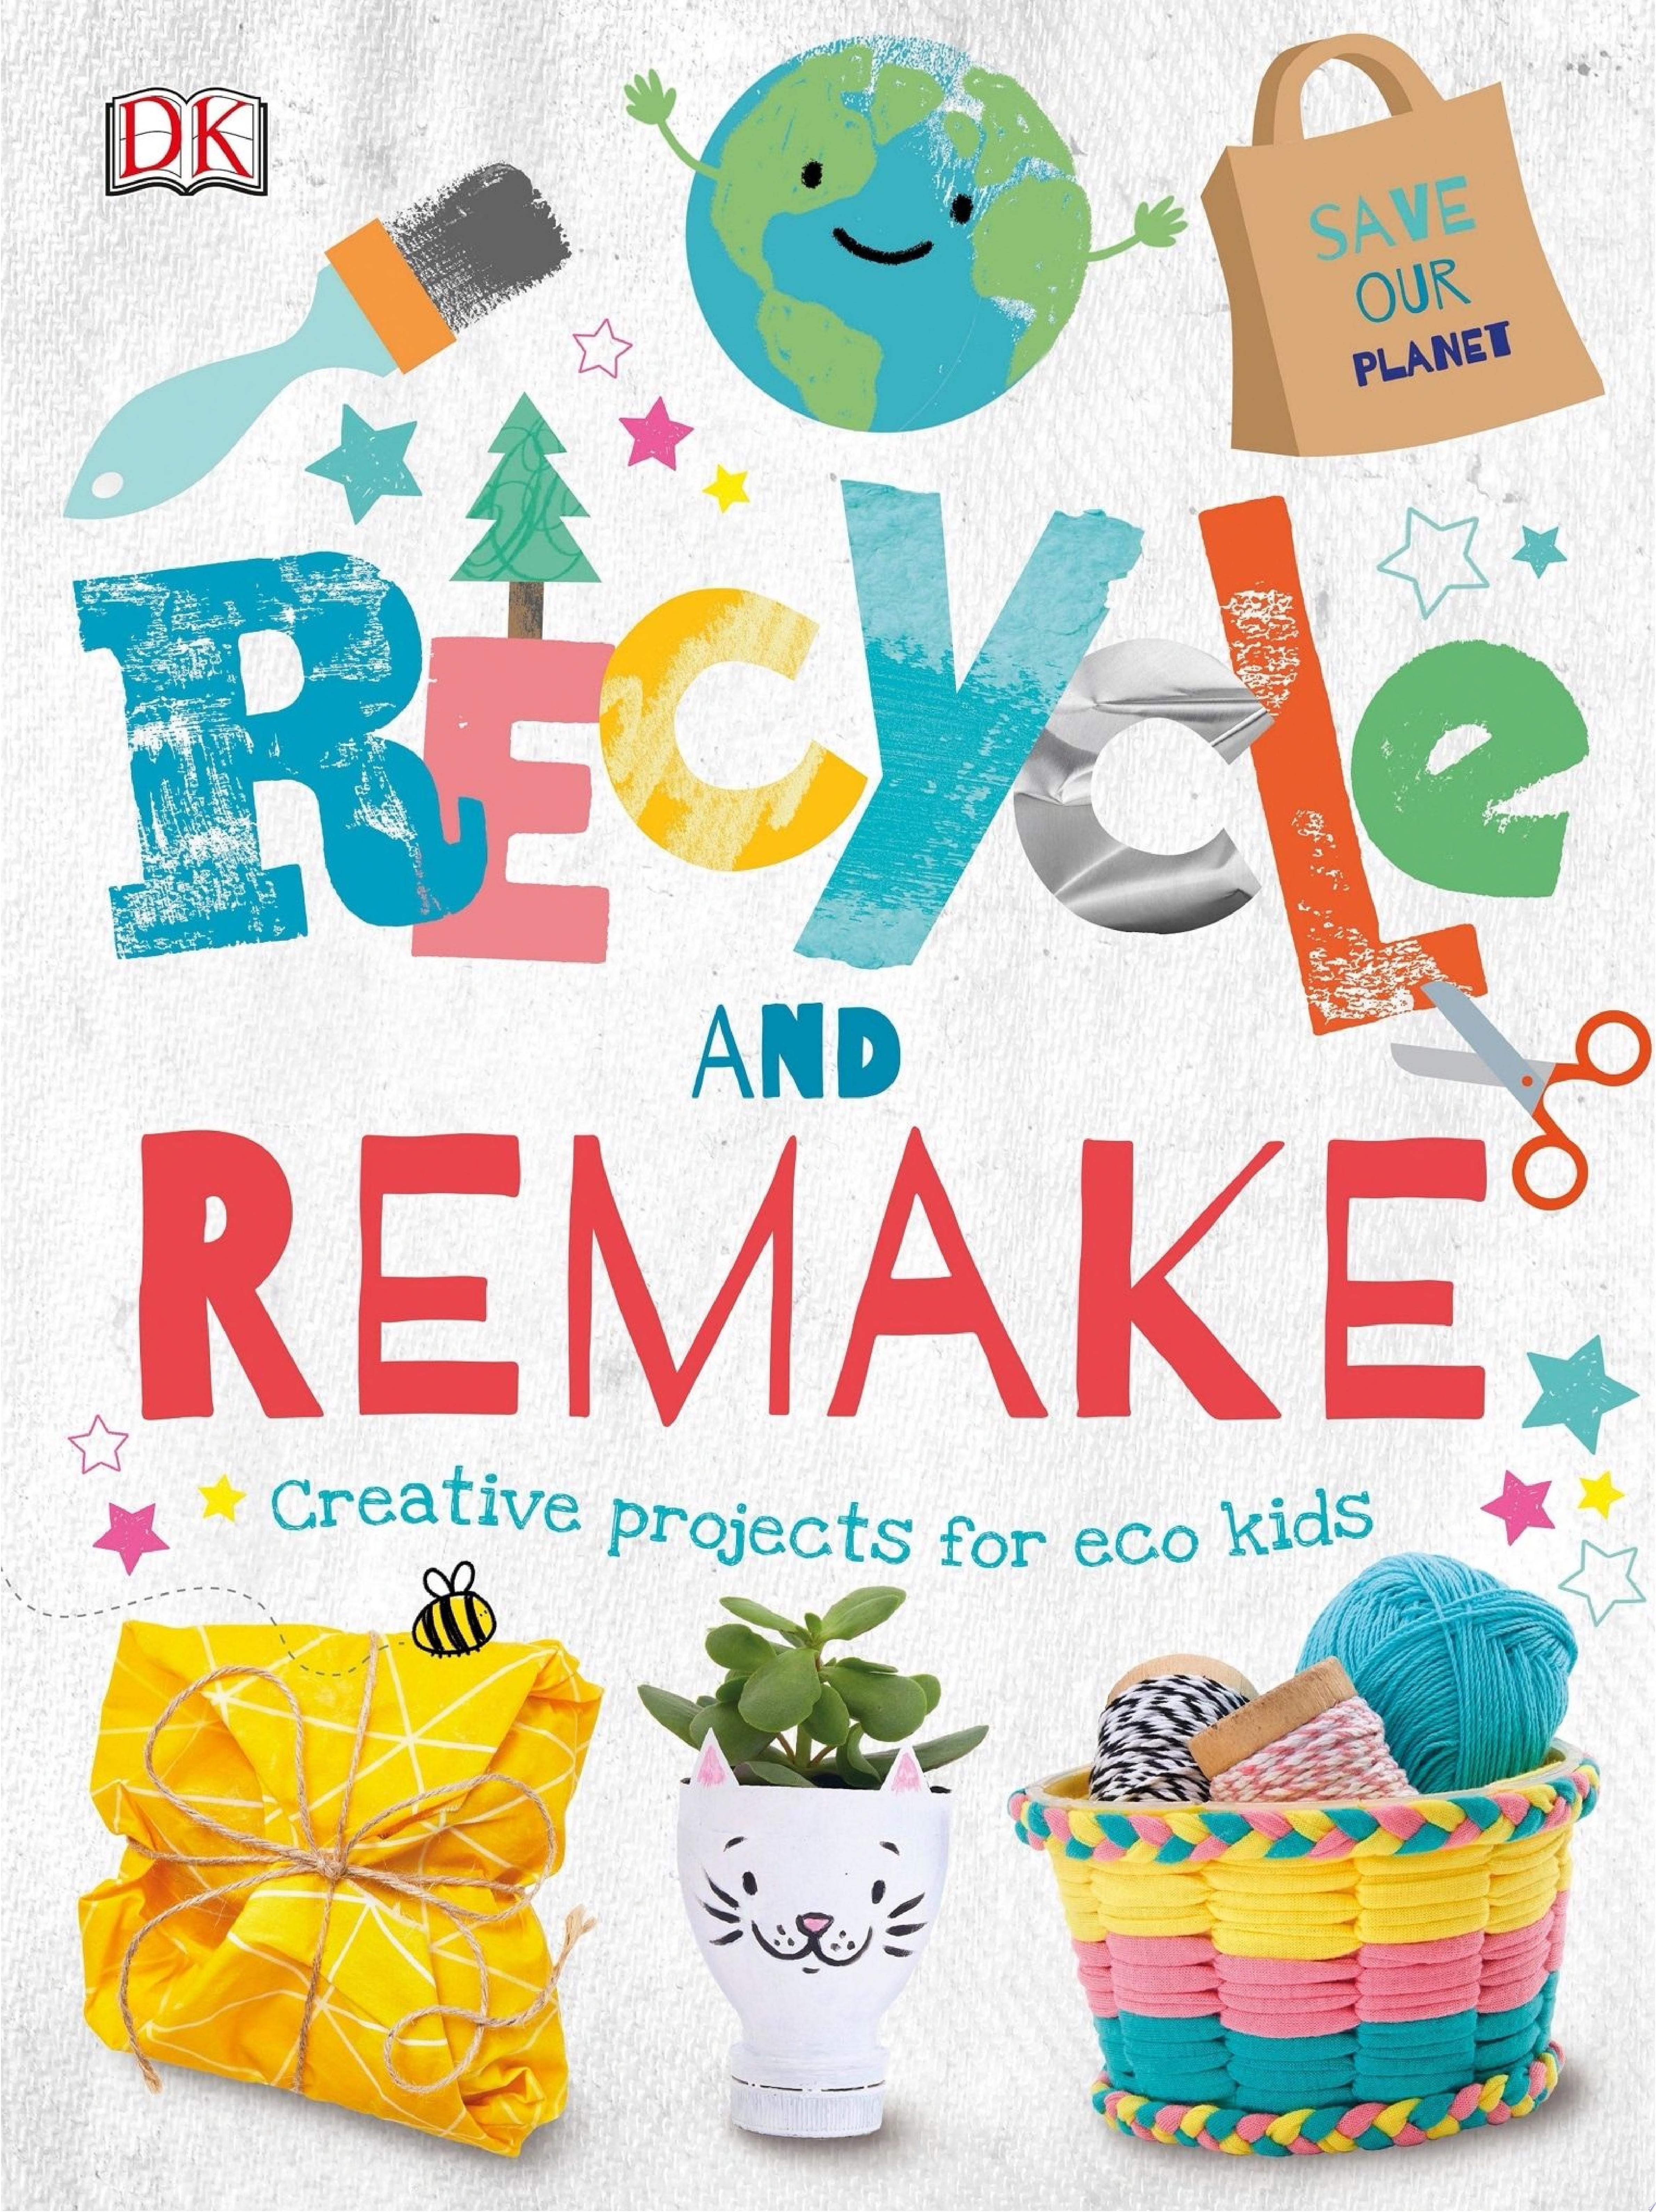 Image for "Recycle and Remake"